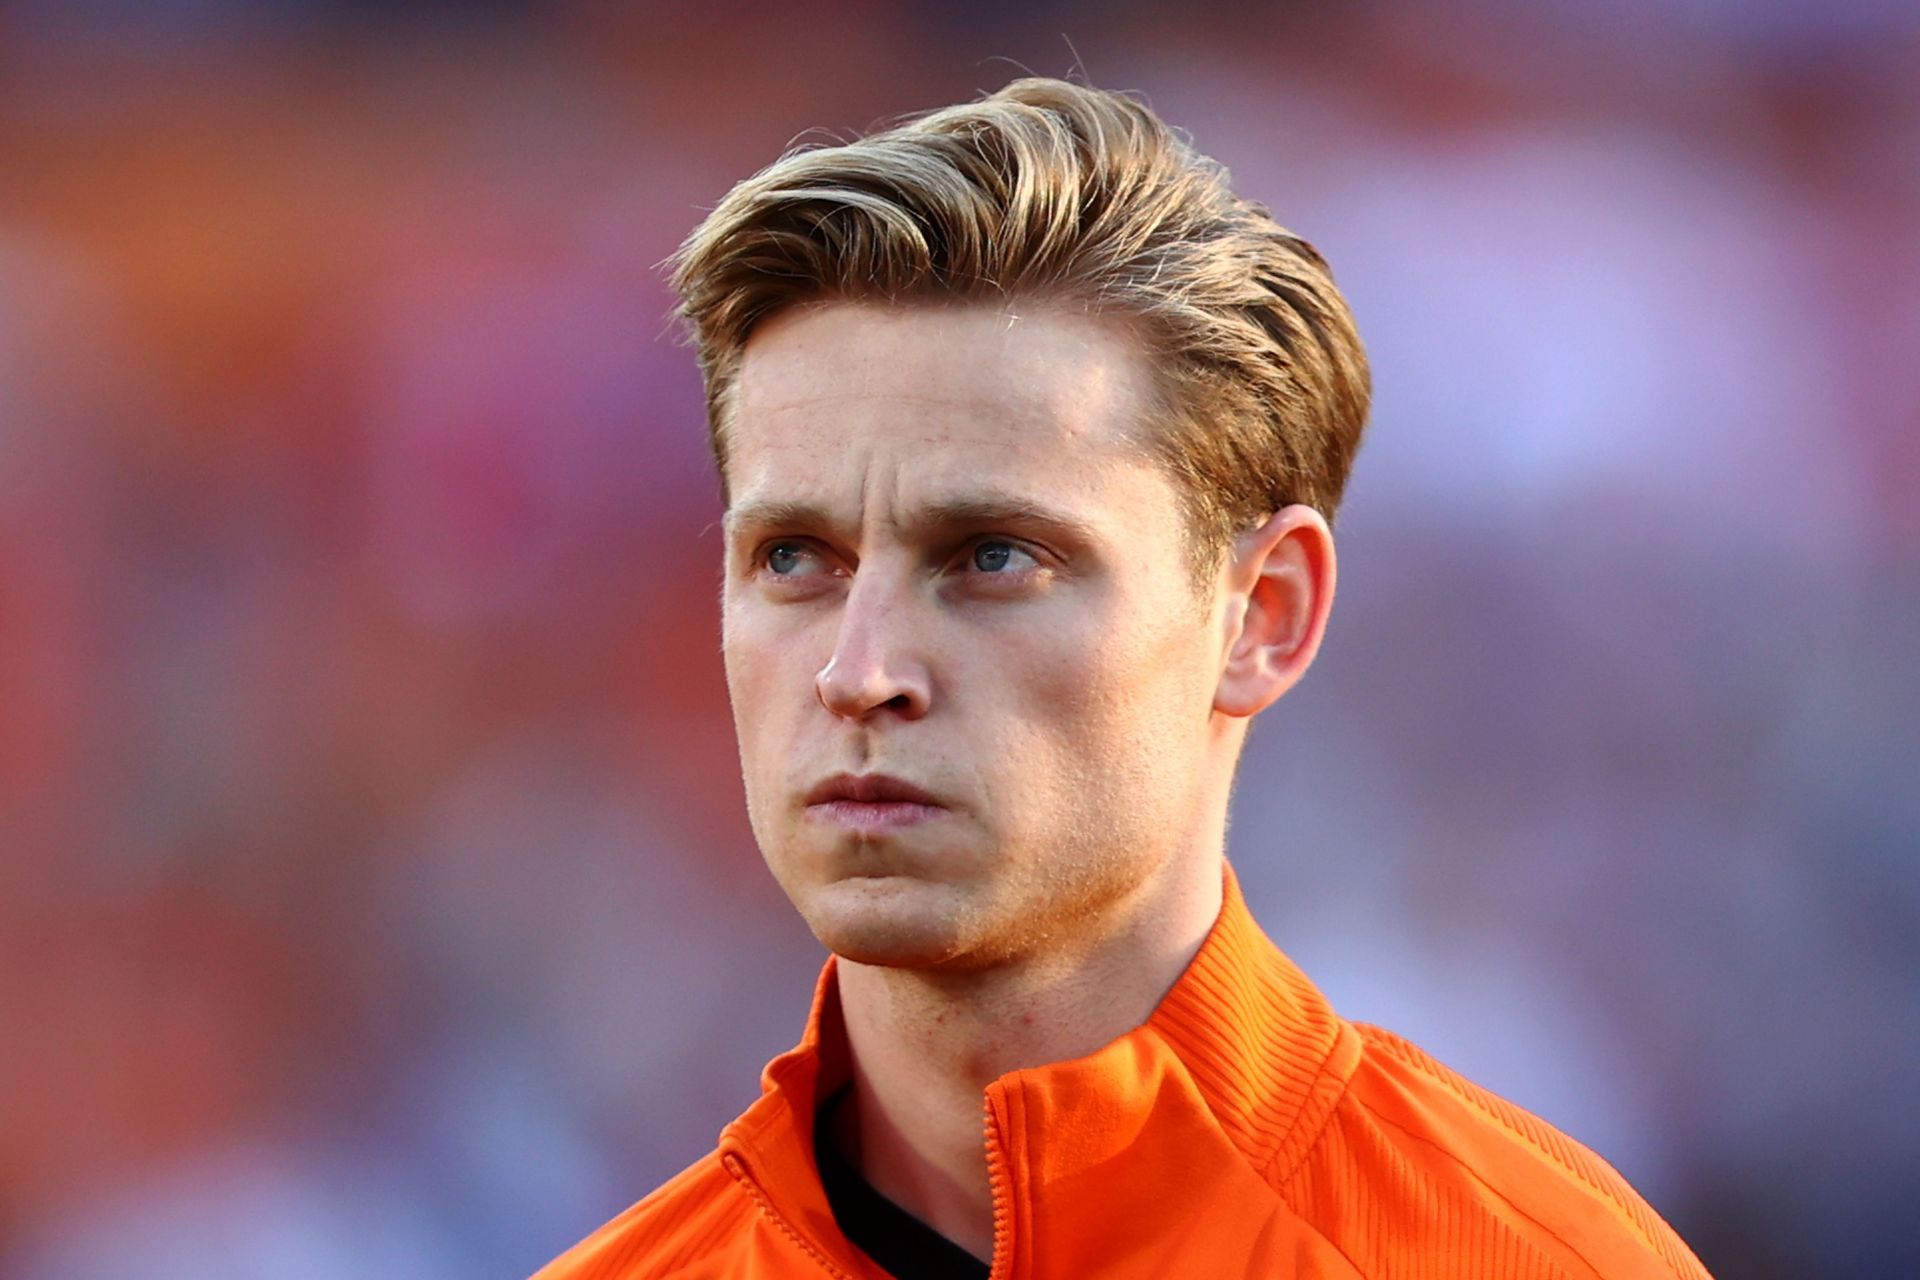 Frenkie de Jong continues to be linked with a move to Old Trafford.